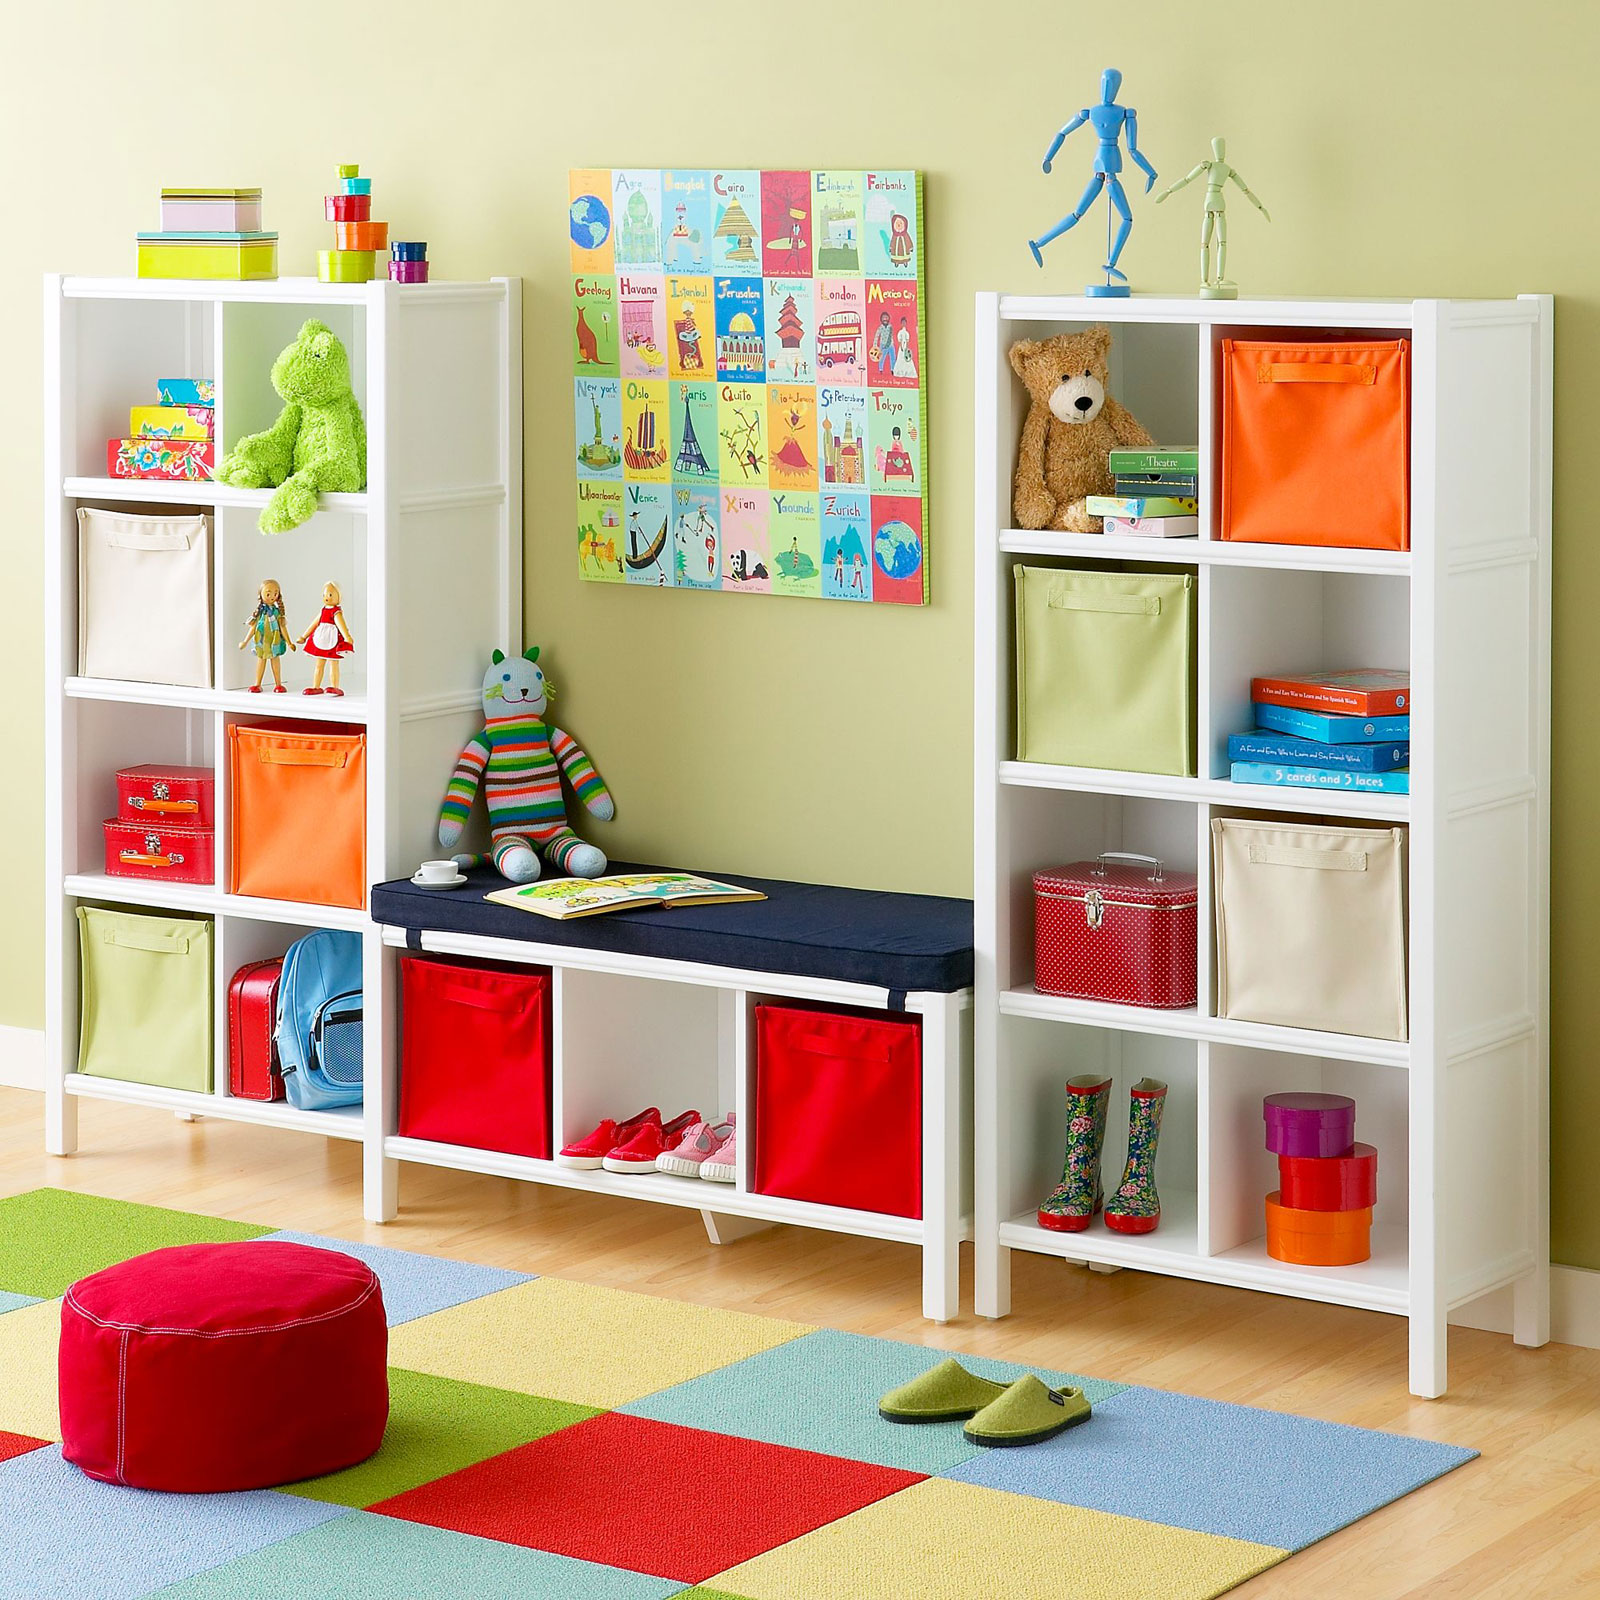 Kids Room Flooring Enchanting Kids Room Applying Wooden Flooring Combined With Green Wall Color Furnished With White Cupboards Of Kids Room Storage Completed With Colorful Rug Kids Room The Two Ideas For Making The Kids Room Storage